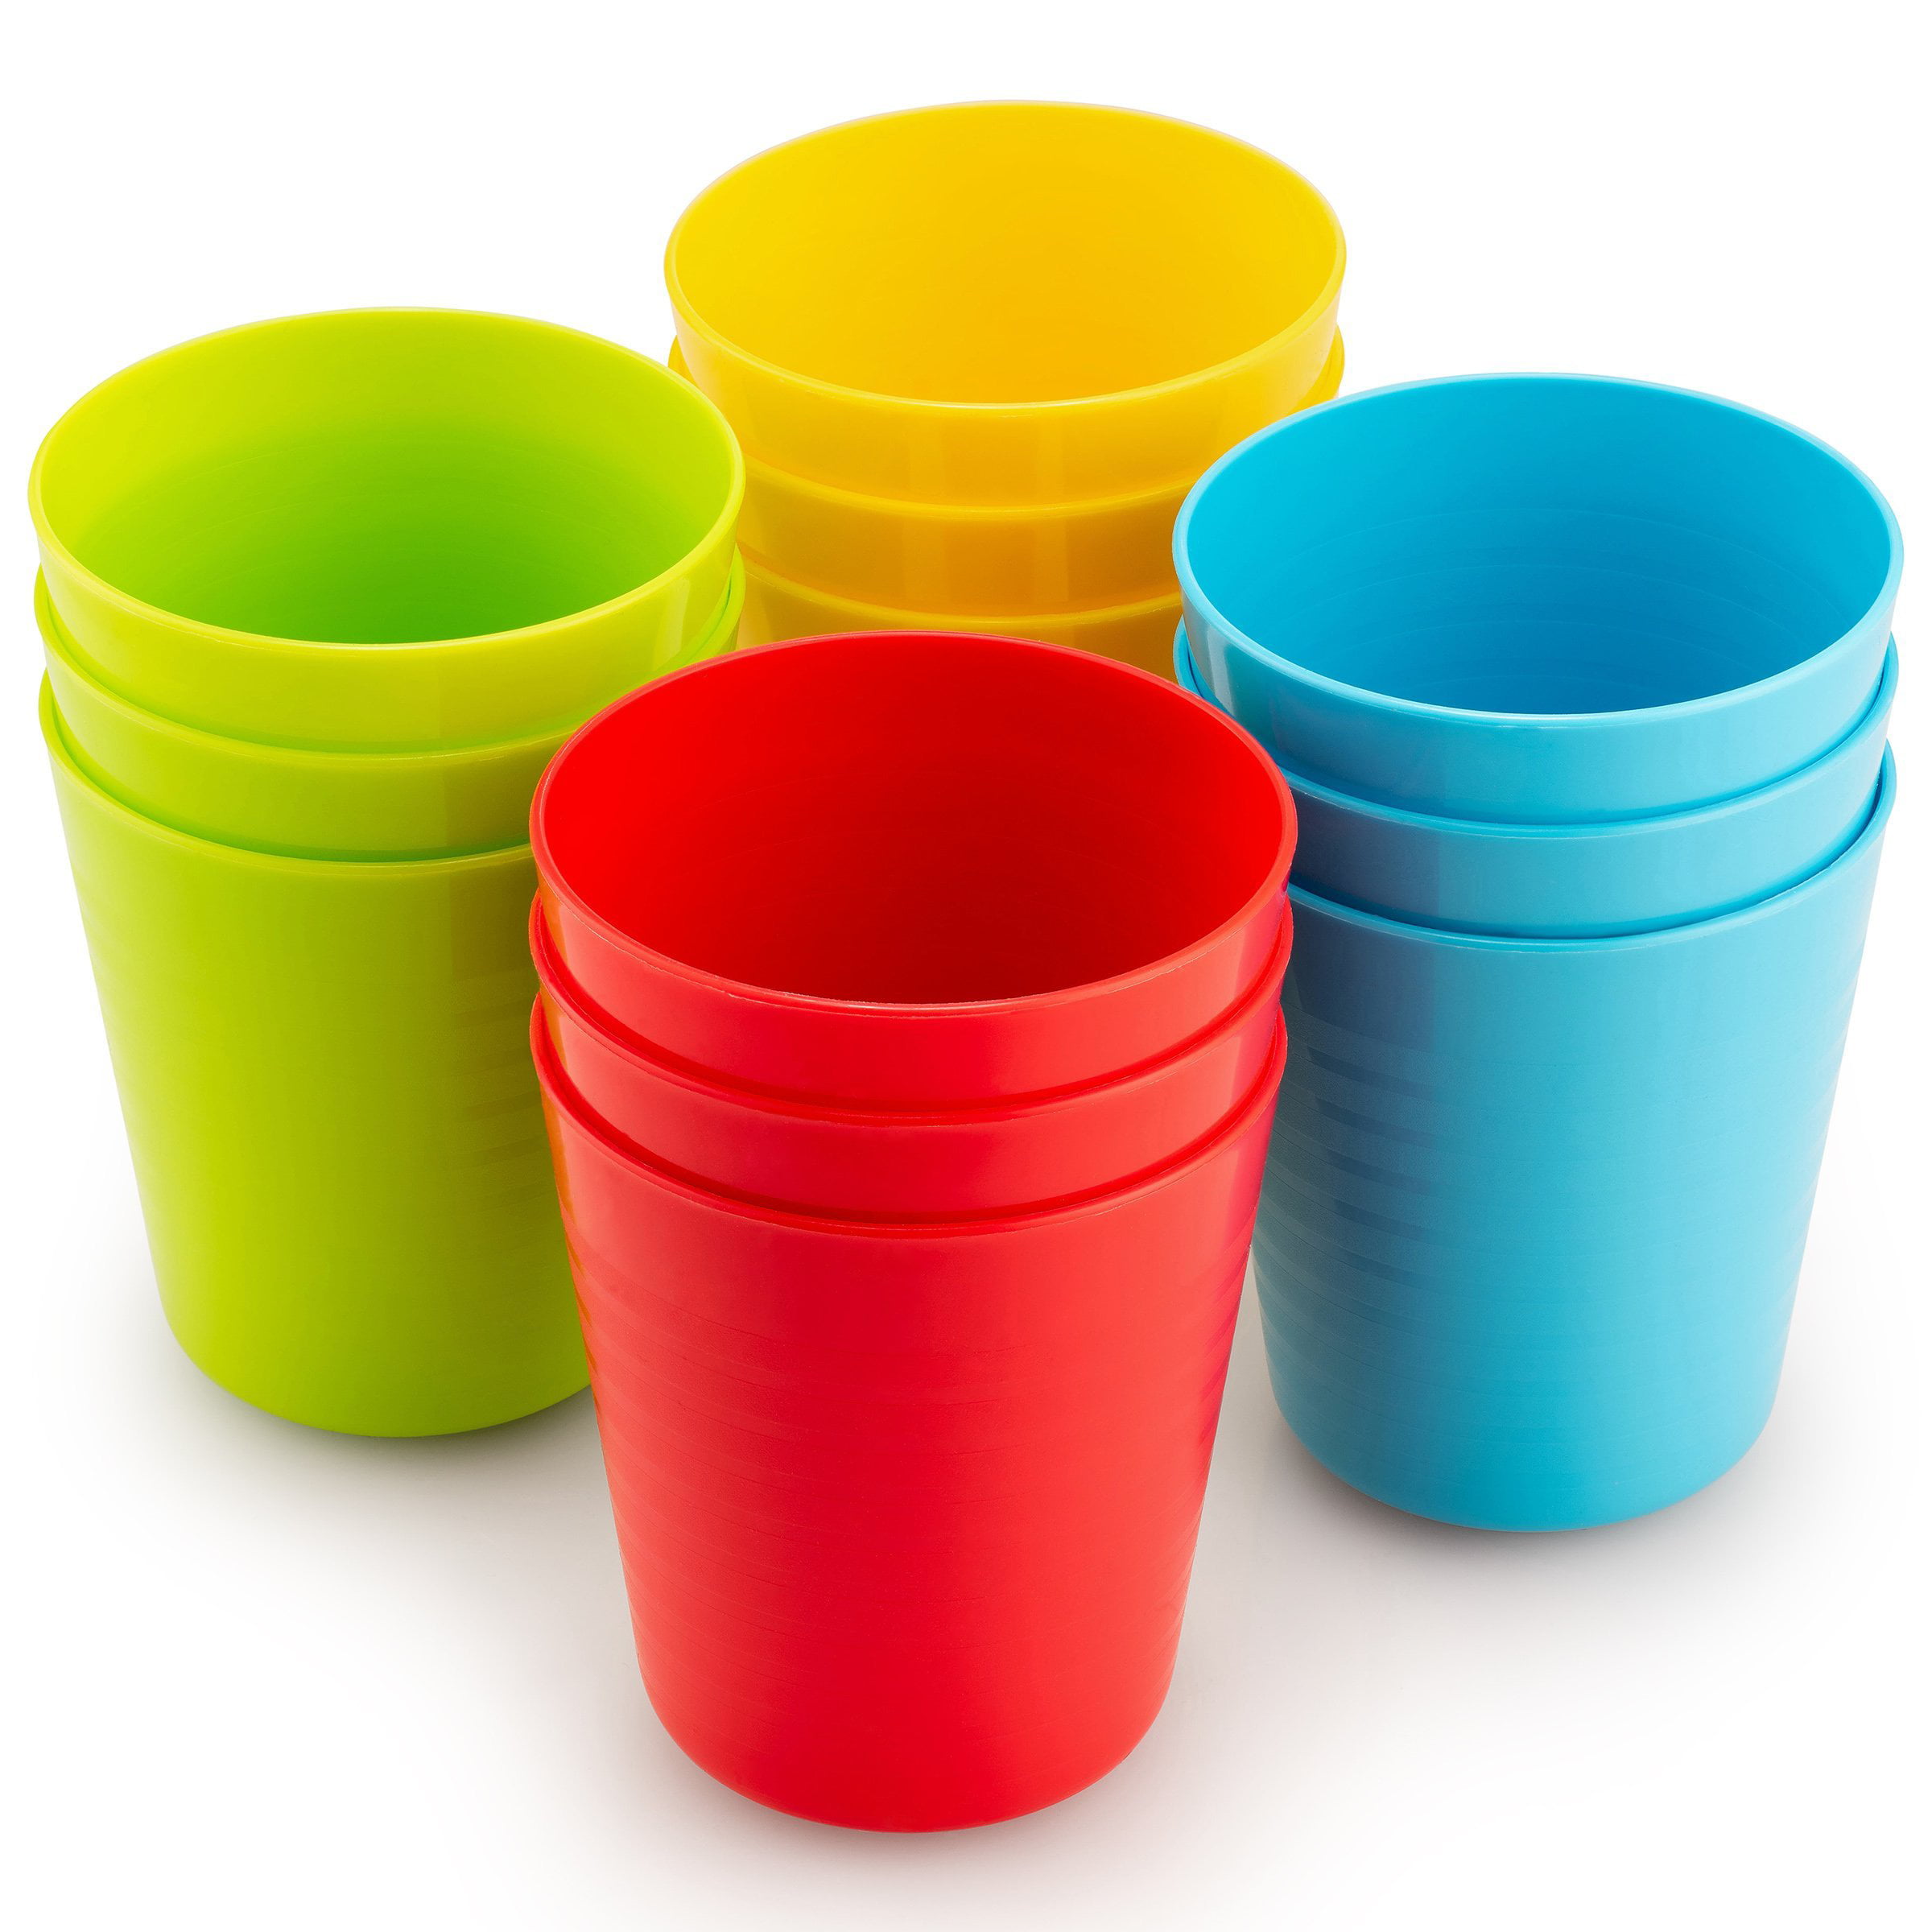 Kids Cups - Set of 12 Kids Plastic Cups - 8 oz Kids Drinking Cups -Plastic  Cups Reusable - Dishwasher Safe - BPA-Free Cups for Kids &Toddlers Bright  Colored - Unbreakable Toddler Cups 